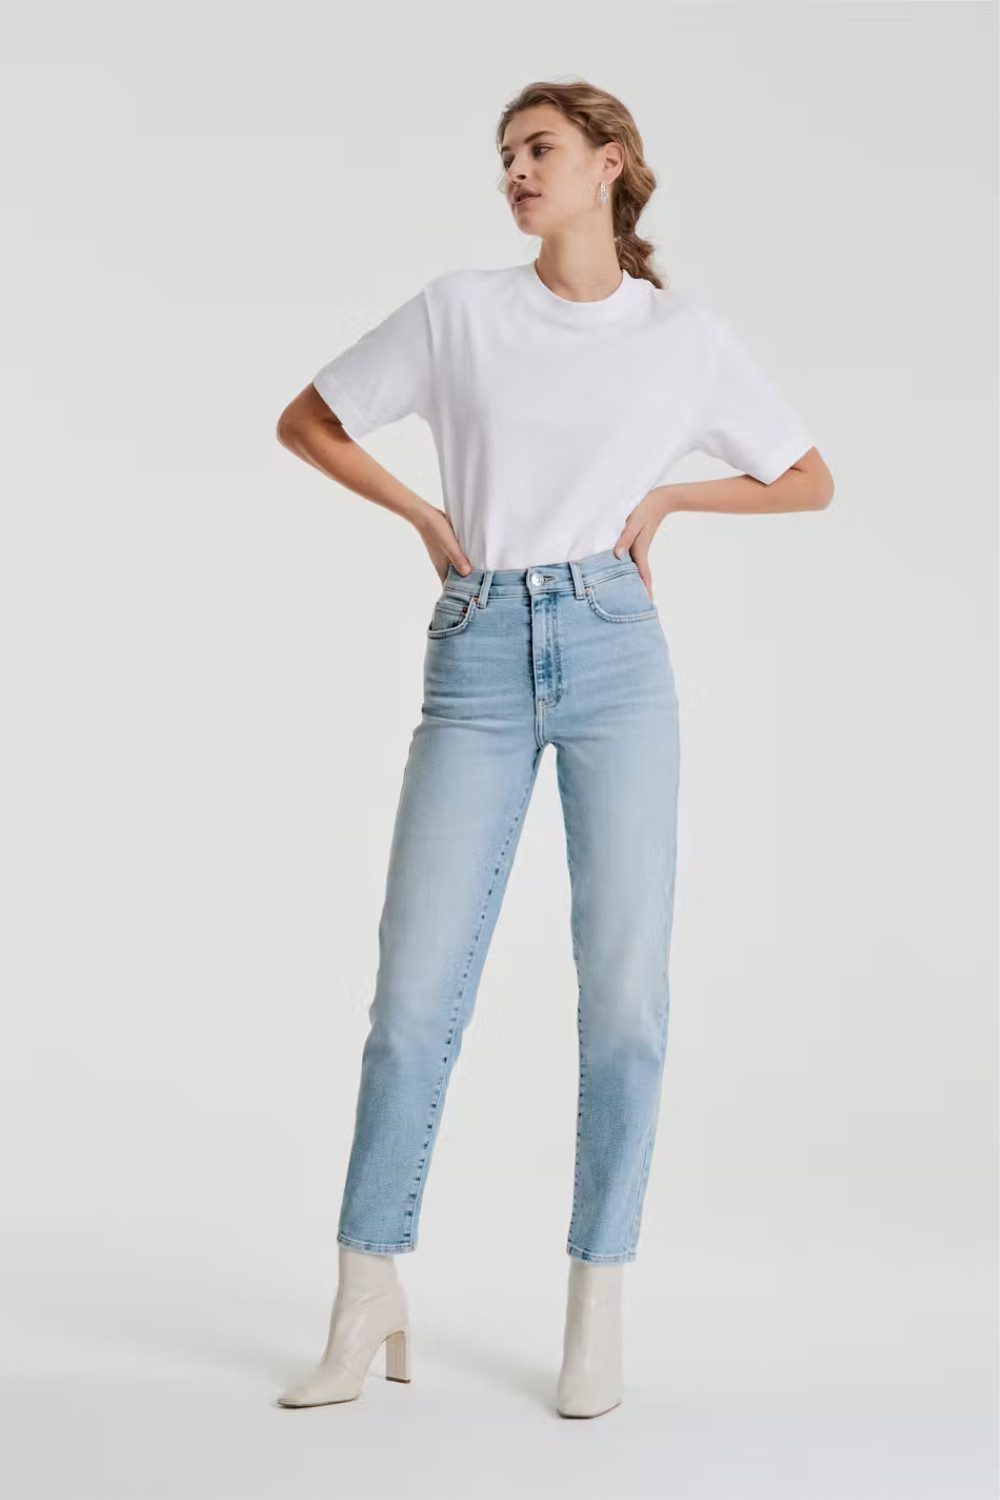 Gina Tricot Mom-Jeans